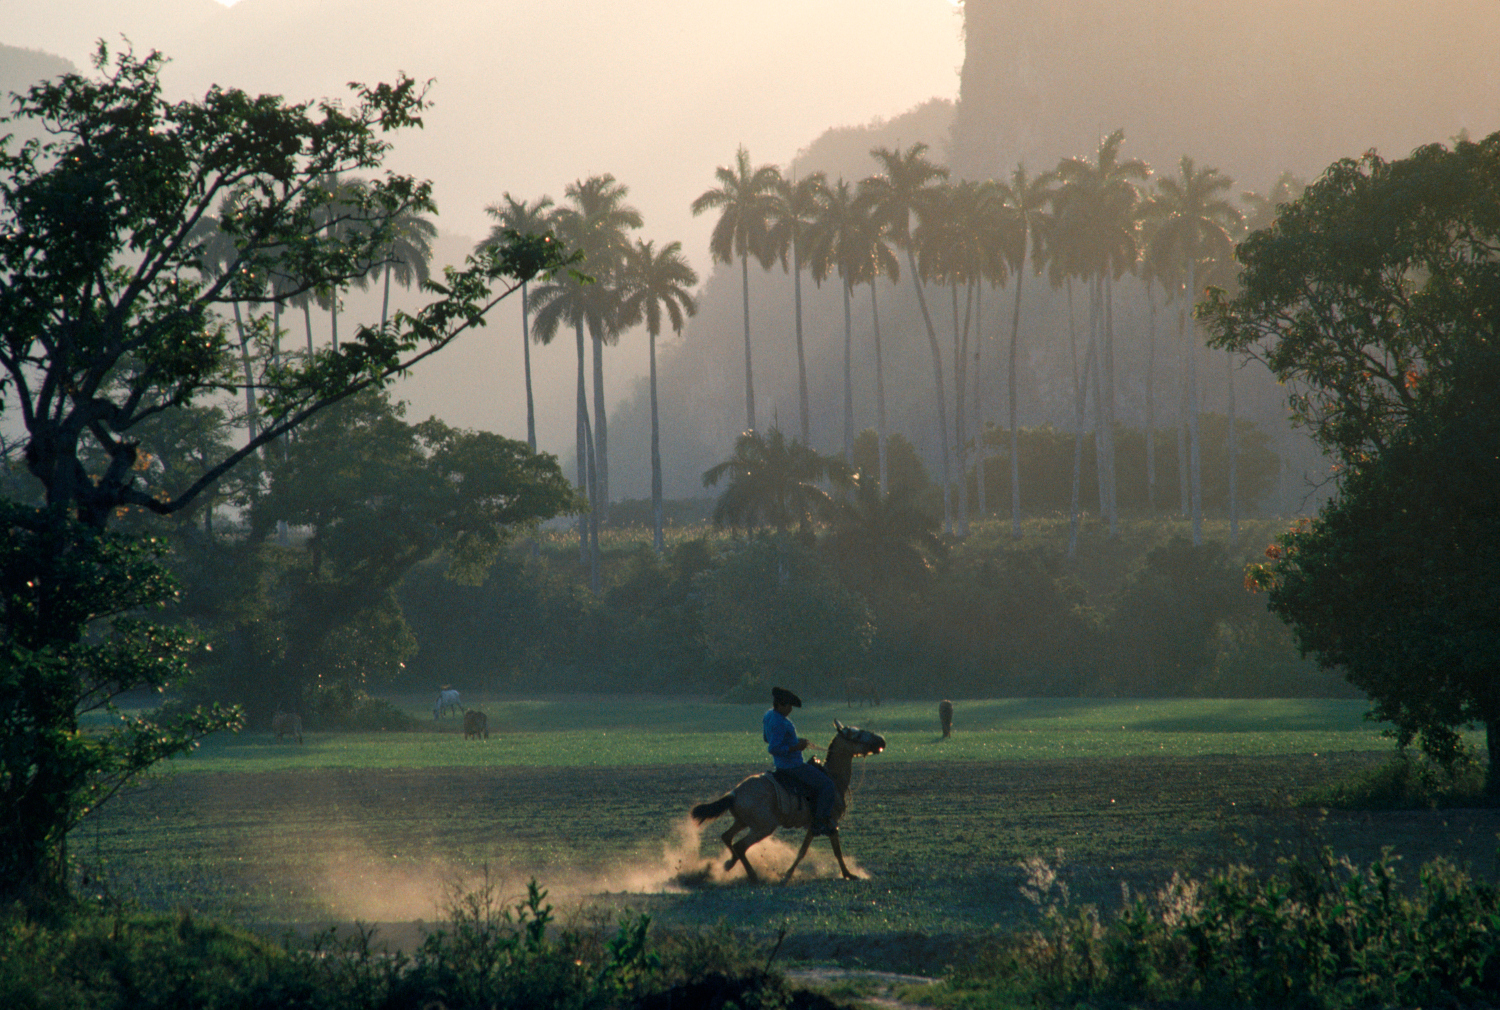 Viñales: a rural cowboy country that feels a world away from bustling Havana. Image by Jose Azel / Aurora Open / Getty